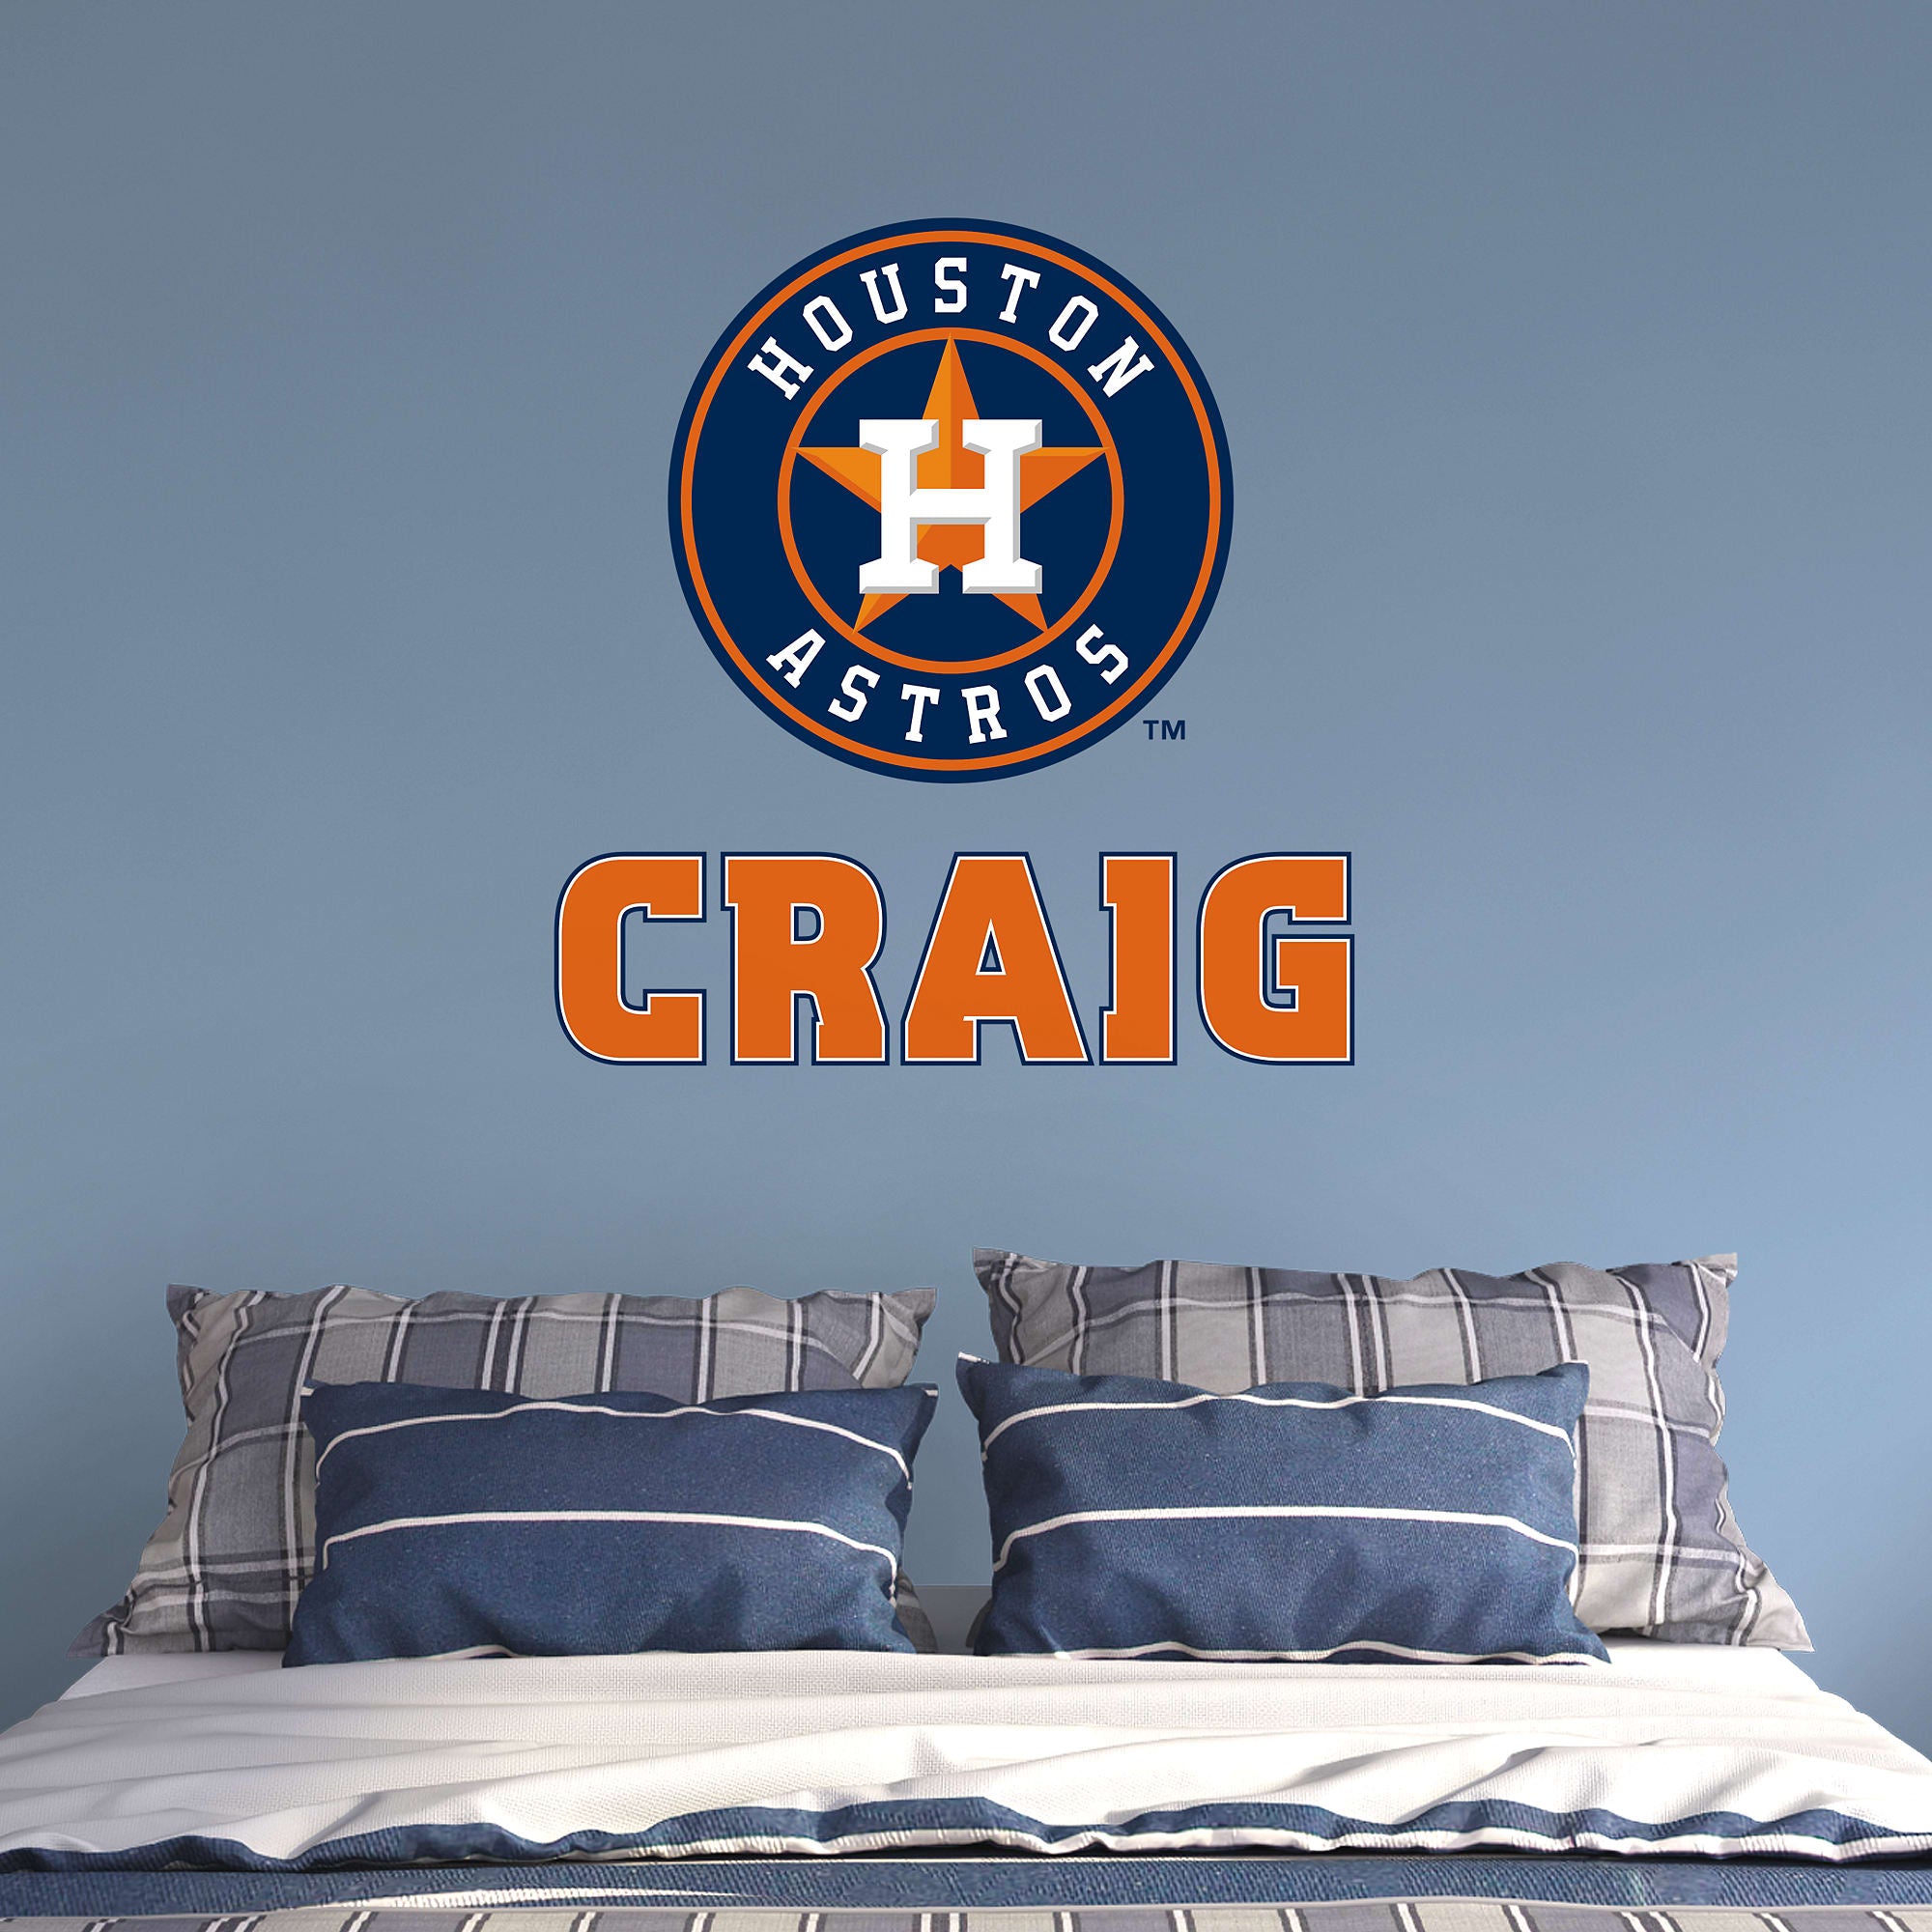 Houston Astros: Stacked Personalized Name - Officially Licensed MLB Transfer Decal in Orange (52"W x 39.5"H) by Fathead | Vinyl